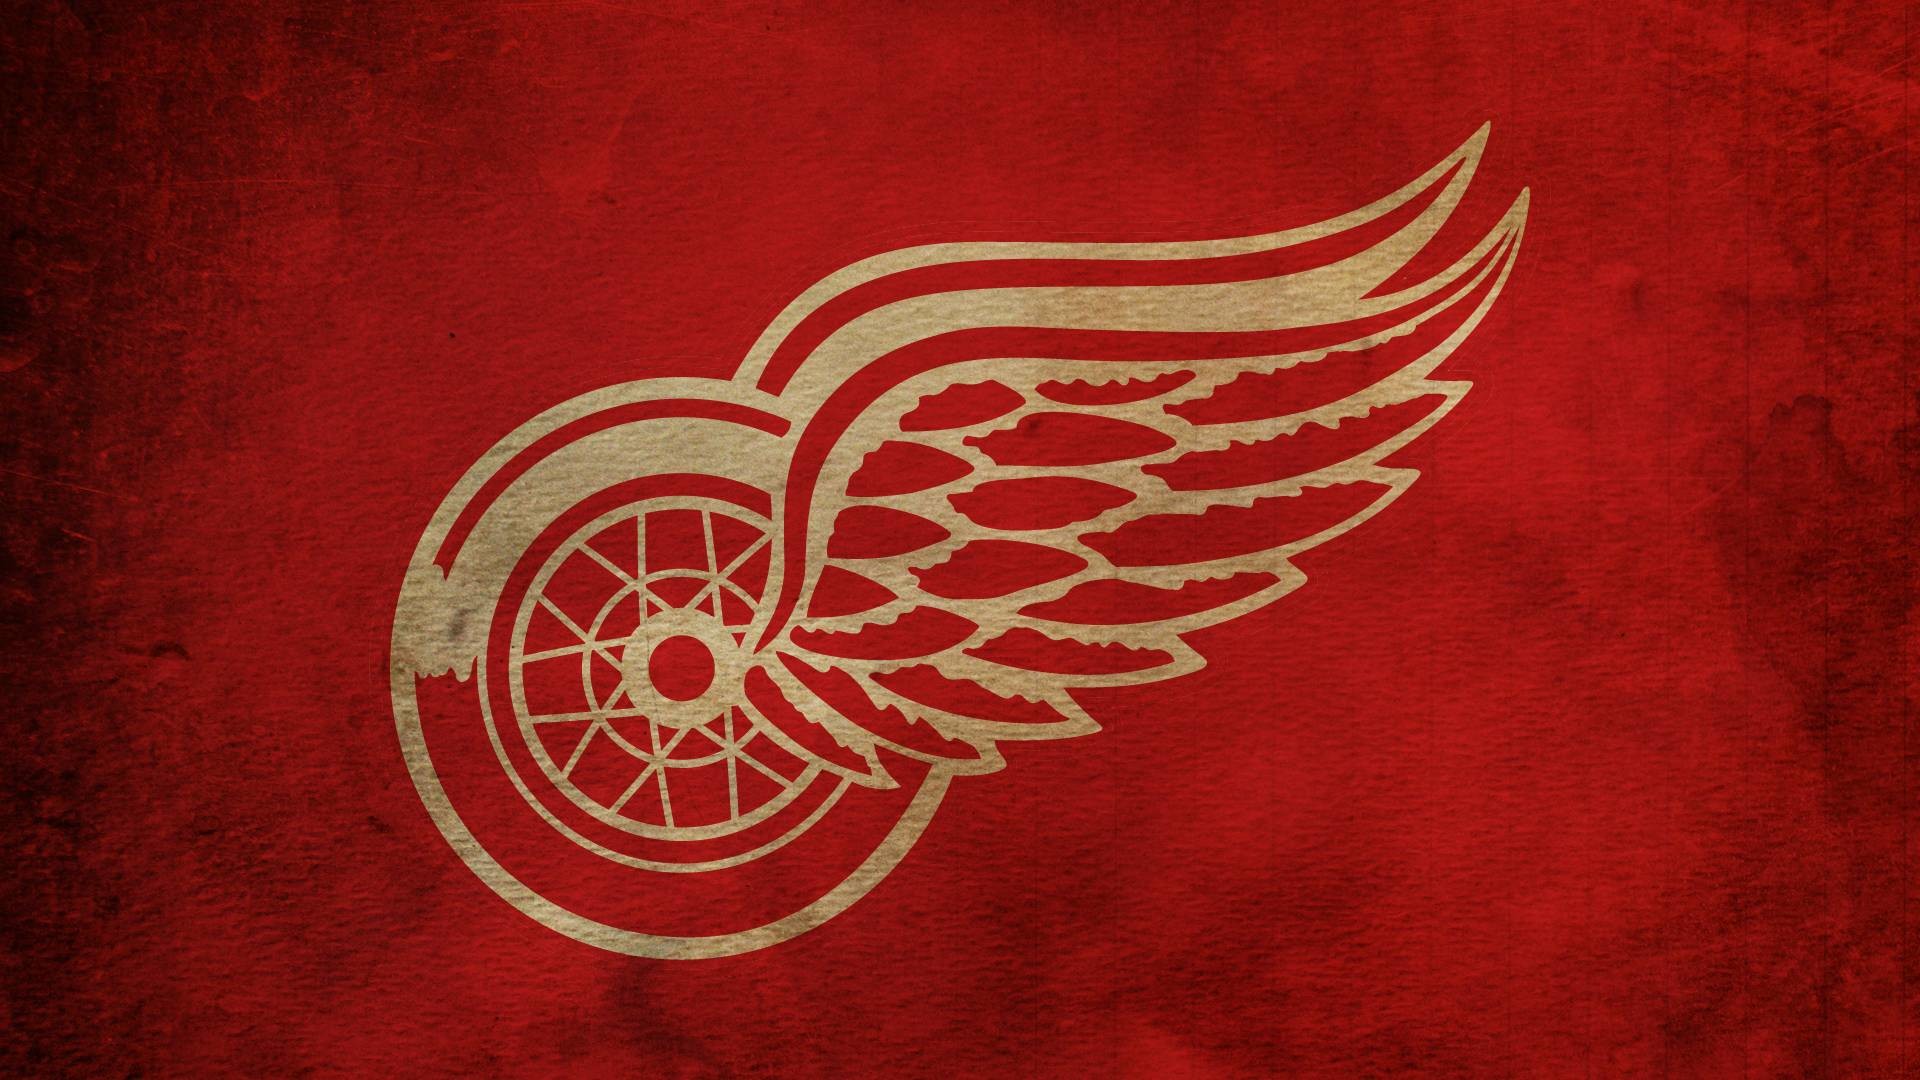 1920x1080 Detroit Red Wings wallpapers | Detroit Red Wings background - Page 2